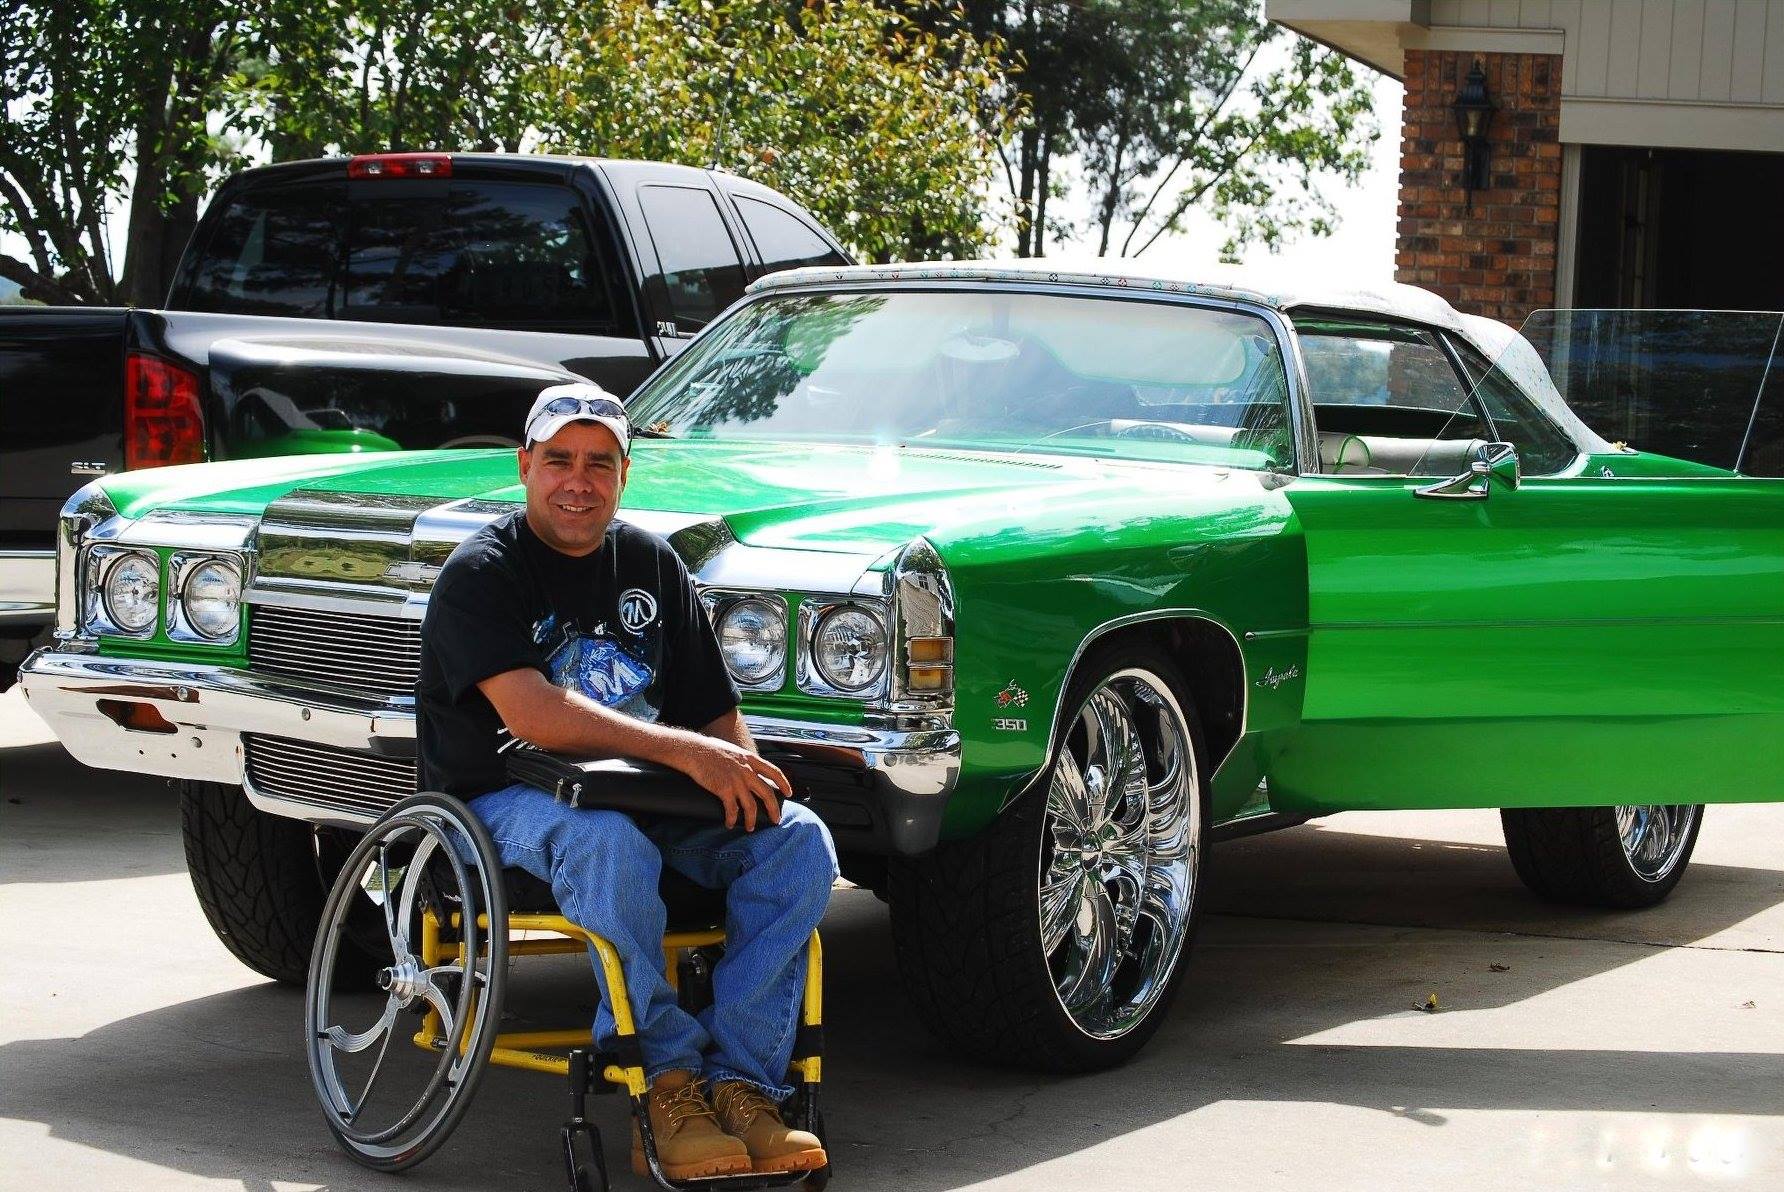 Daniel Ruiz says, "At my home in Alabama just after moving from Miami,Fl. This is a 1972 Chevy Impala that I had built from the ground up with all the bells and whistles a person with disability could wish for.